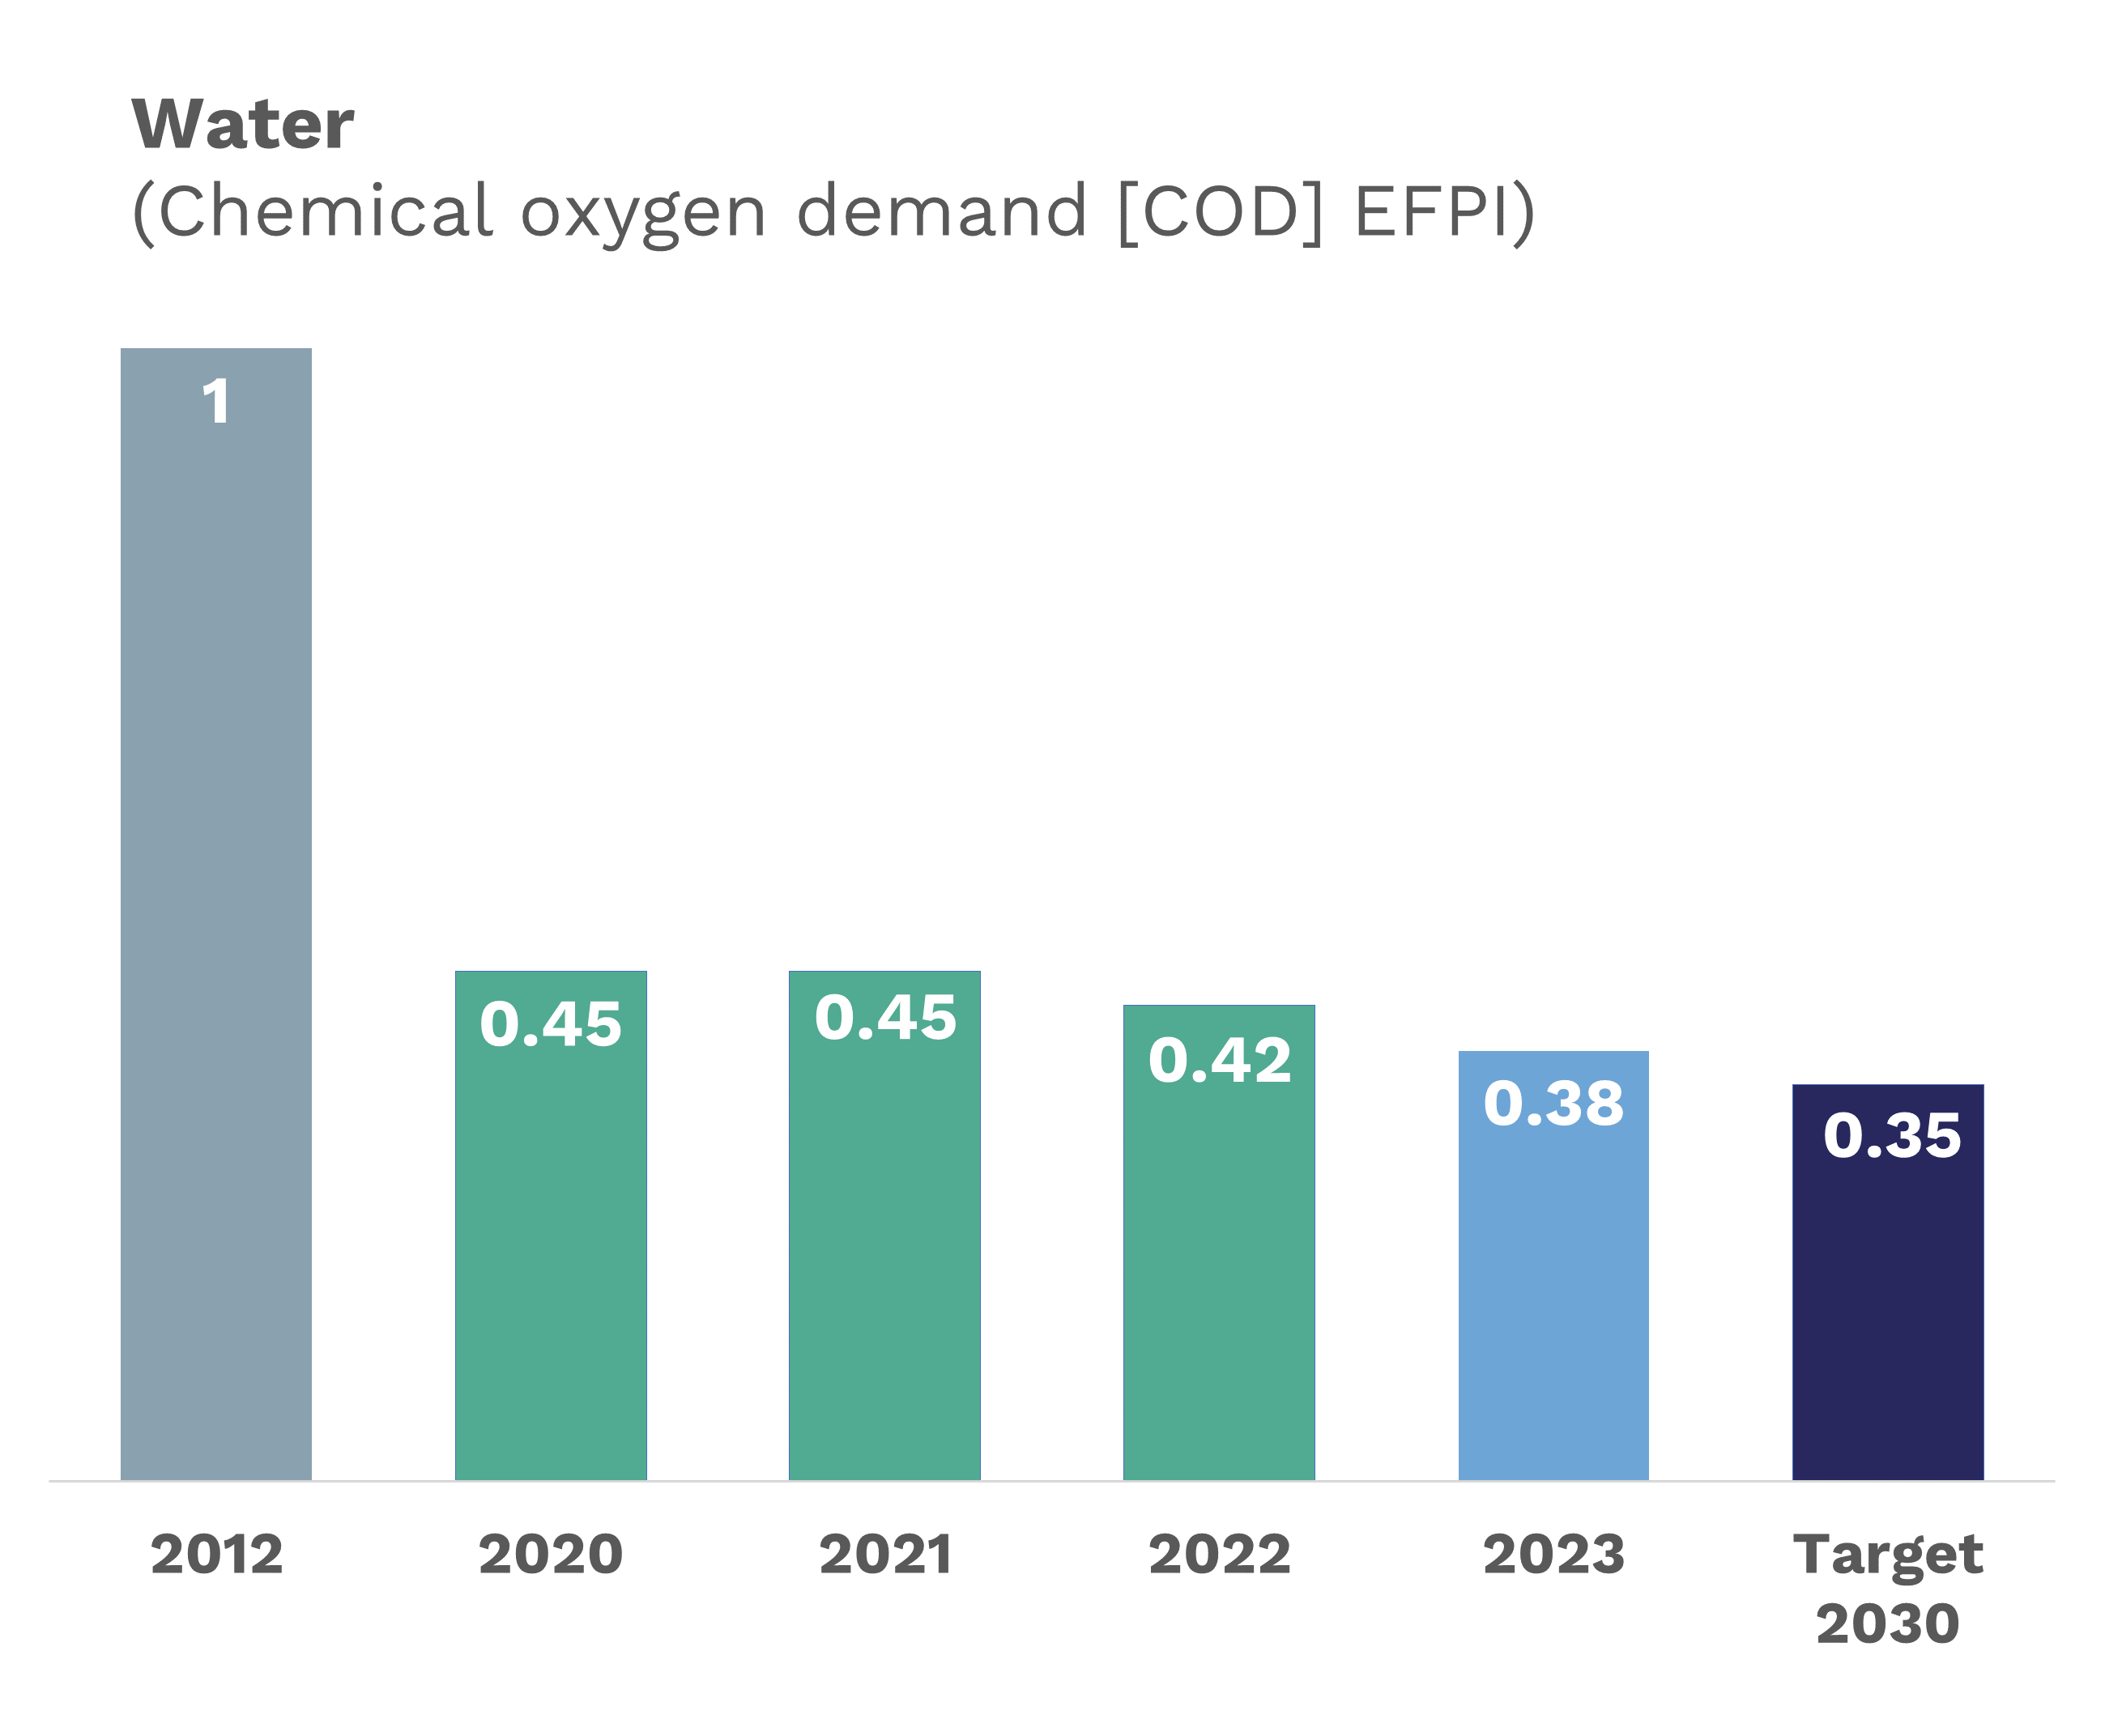 In 2023, Arkema reduced the chemical oxygen demand in the effluent discharged into rivers by 62% compared to 2012.